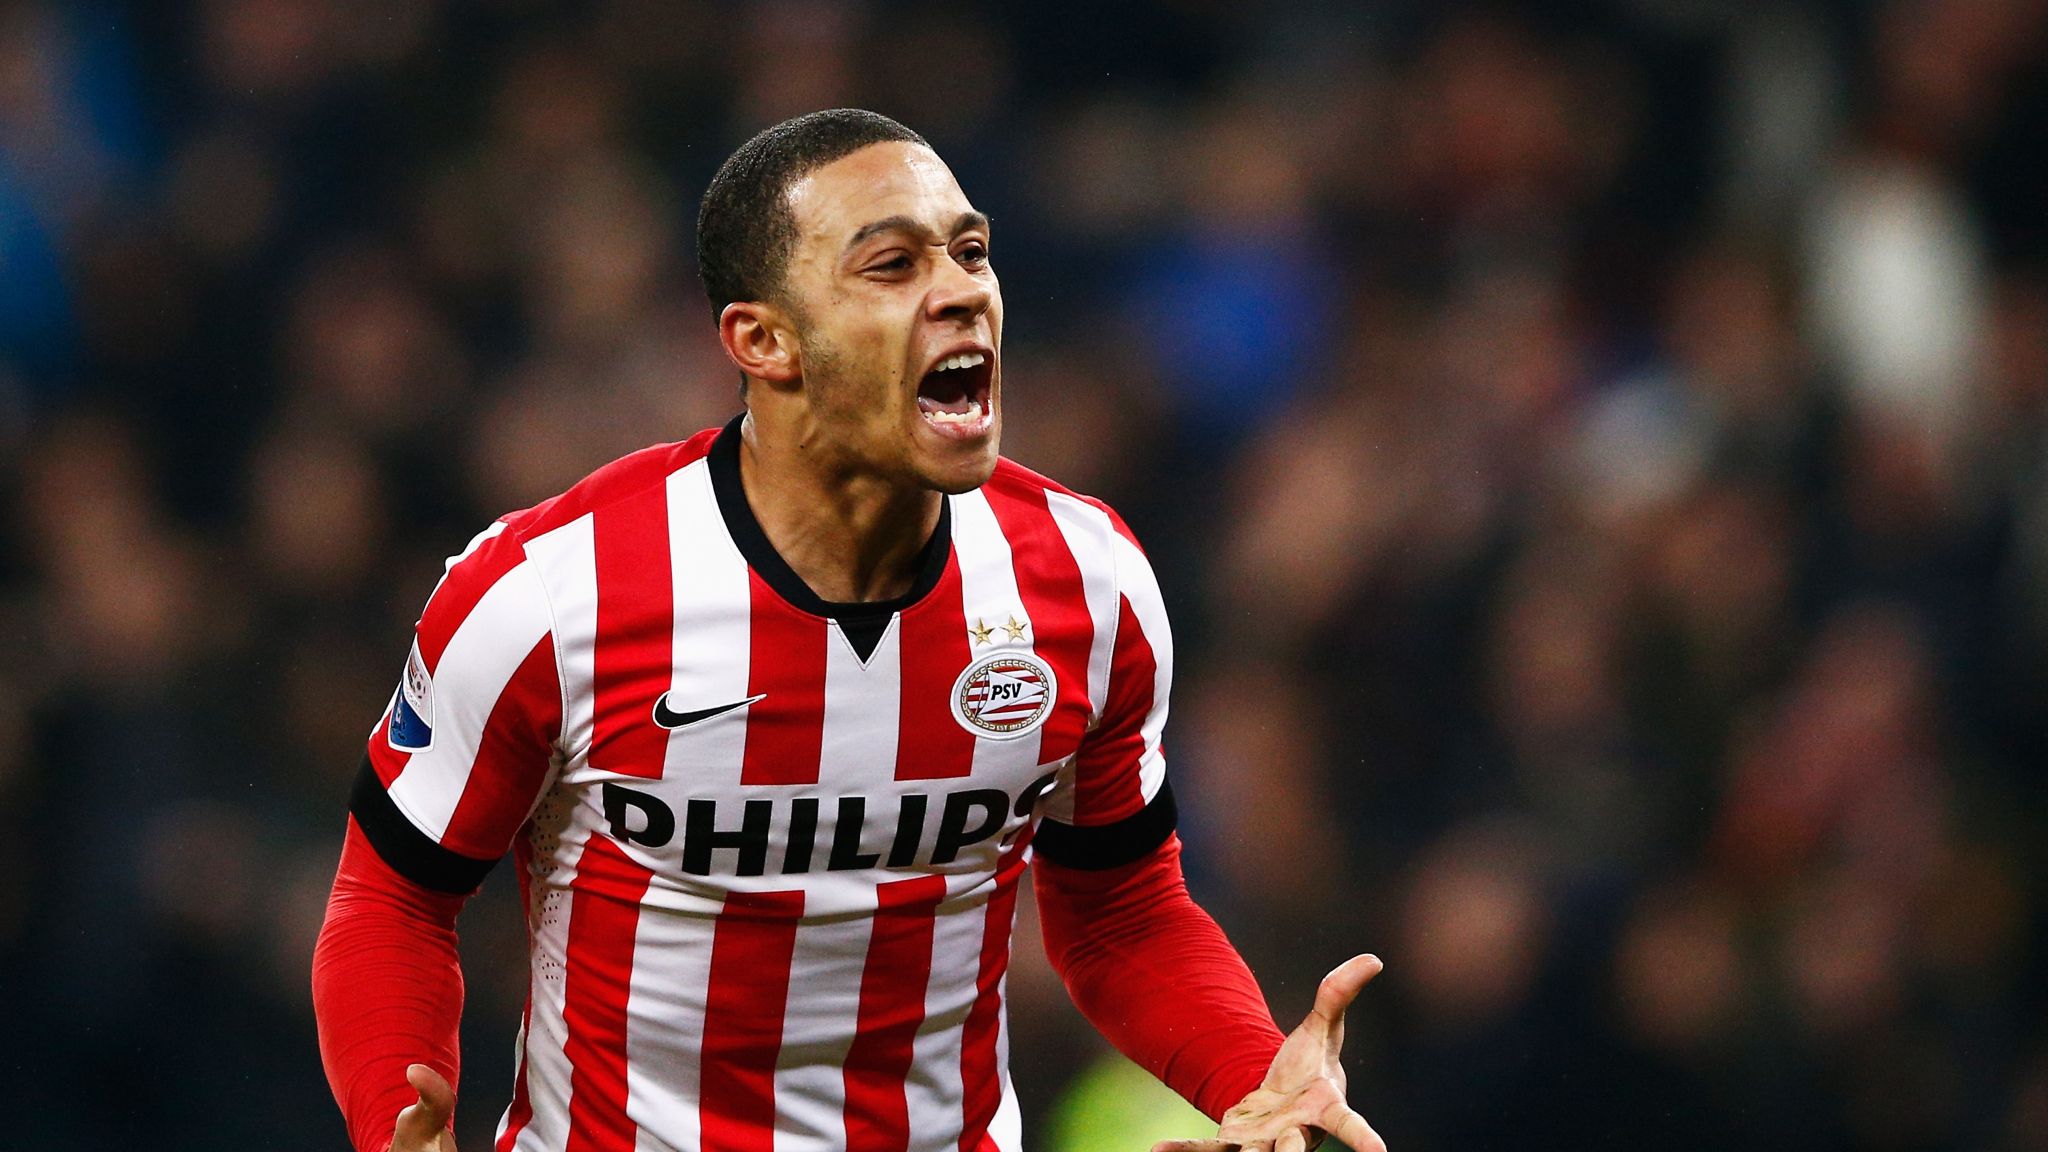 Memphis Depay - Excited to be back with the national team!